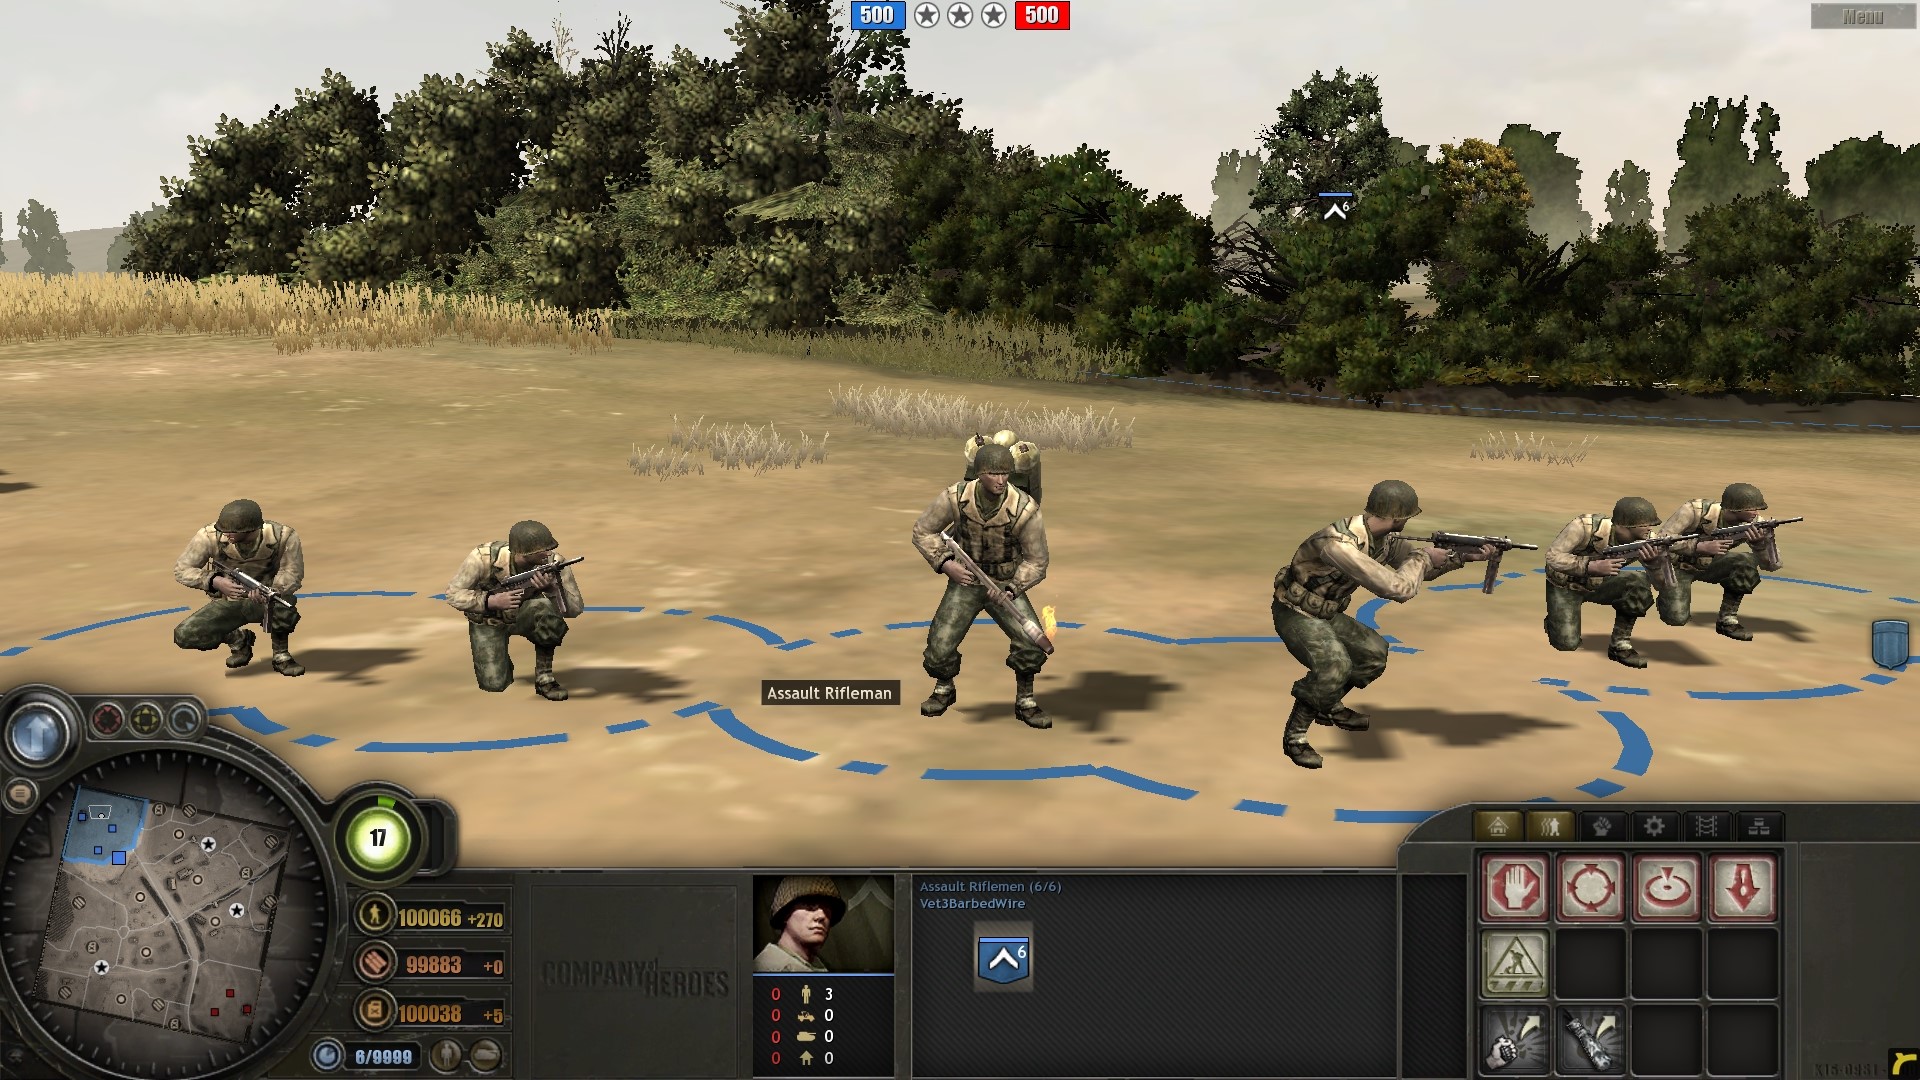 Company of heroes tales of valor multiplayer crack games